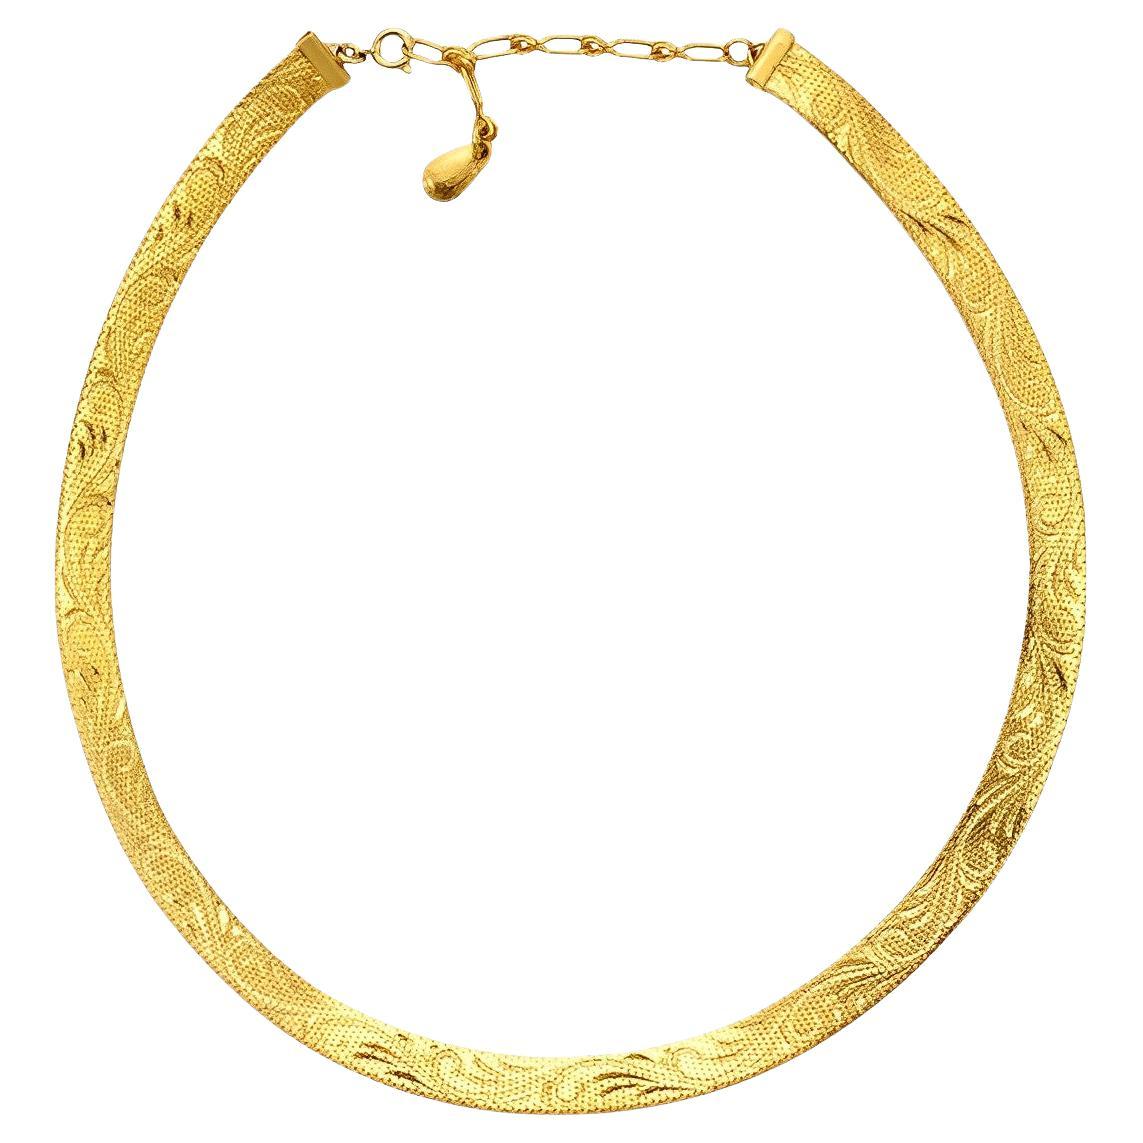 Gold Plated Swirl Design Egyptian Revival Mesh Collar Necklace circa 1980s For Sale